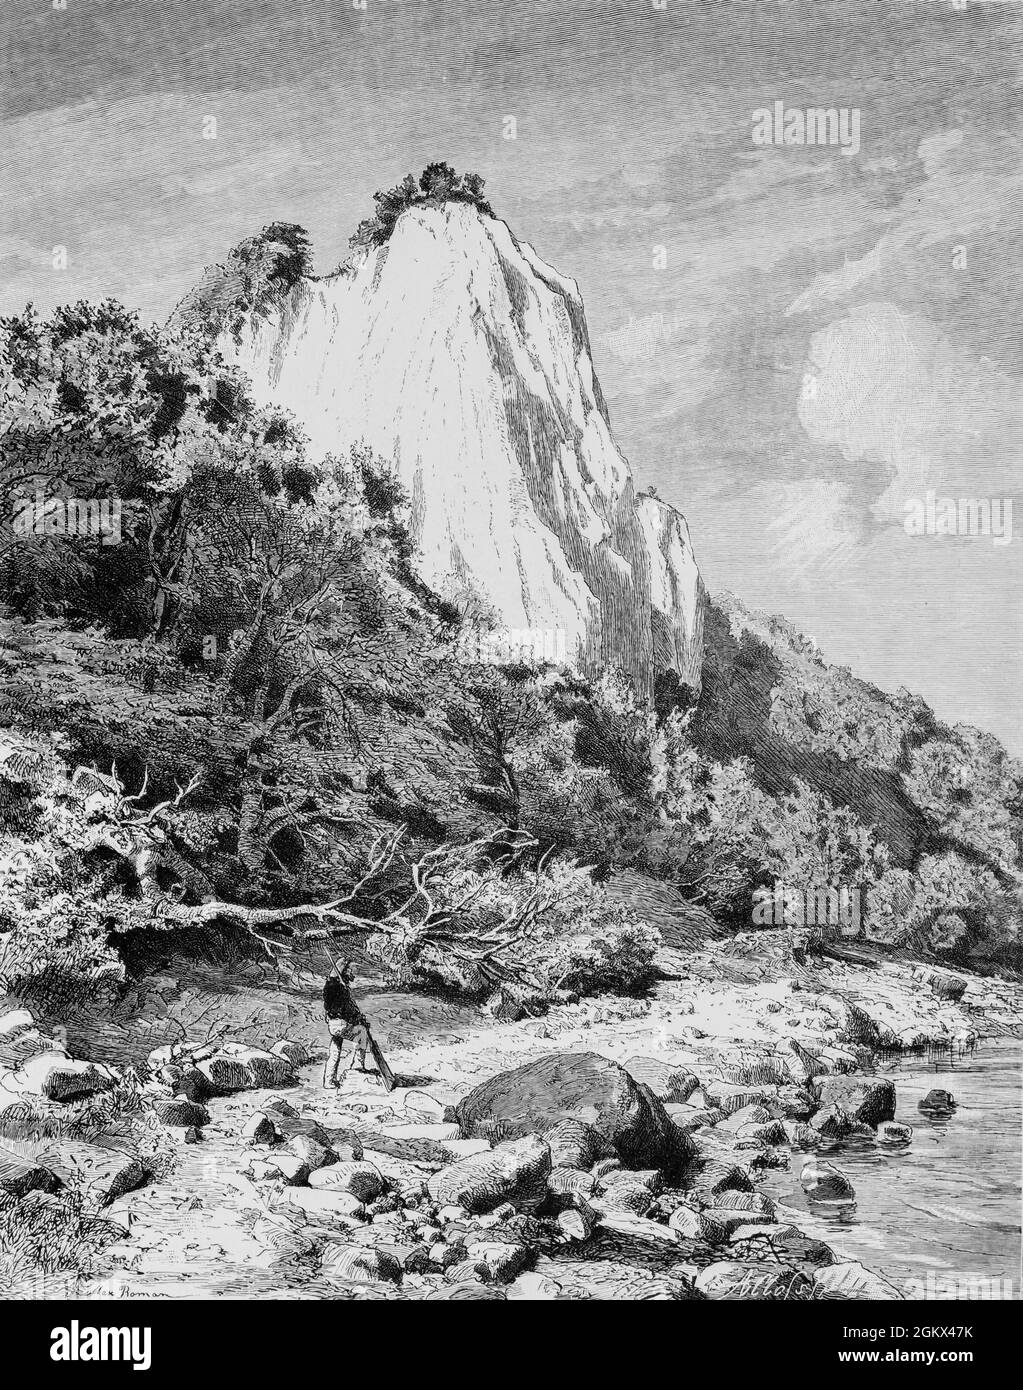 The famous chalk cliff Königsstuhl or King´s Chair on the island of Rügen, Mecklenburg-West Pomerania, East Germany, historical illustration 1880, Stock Photo